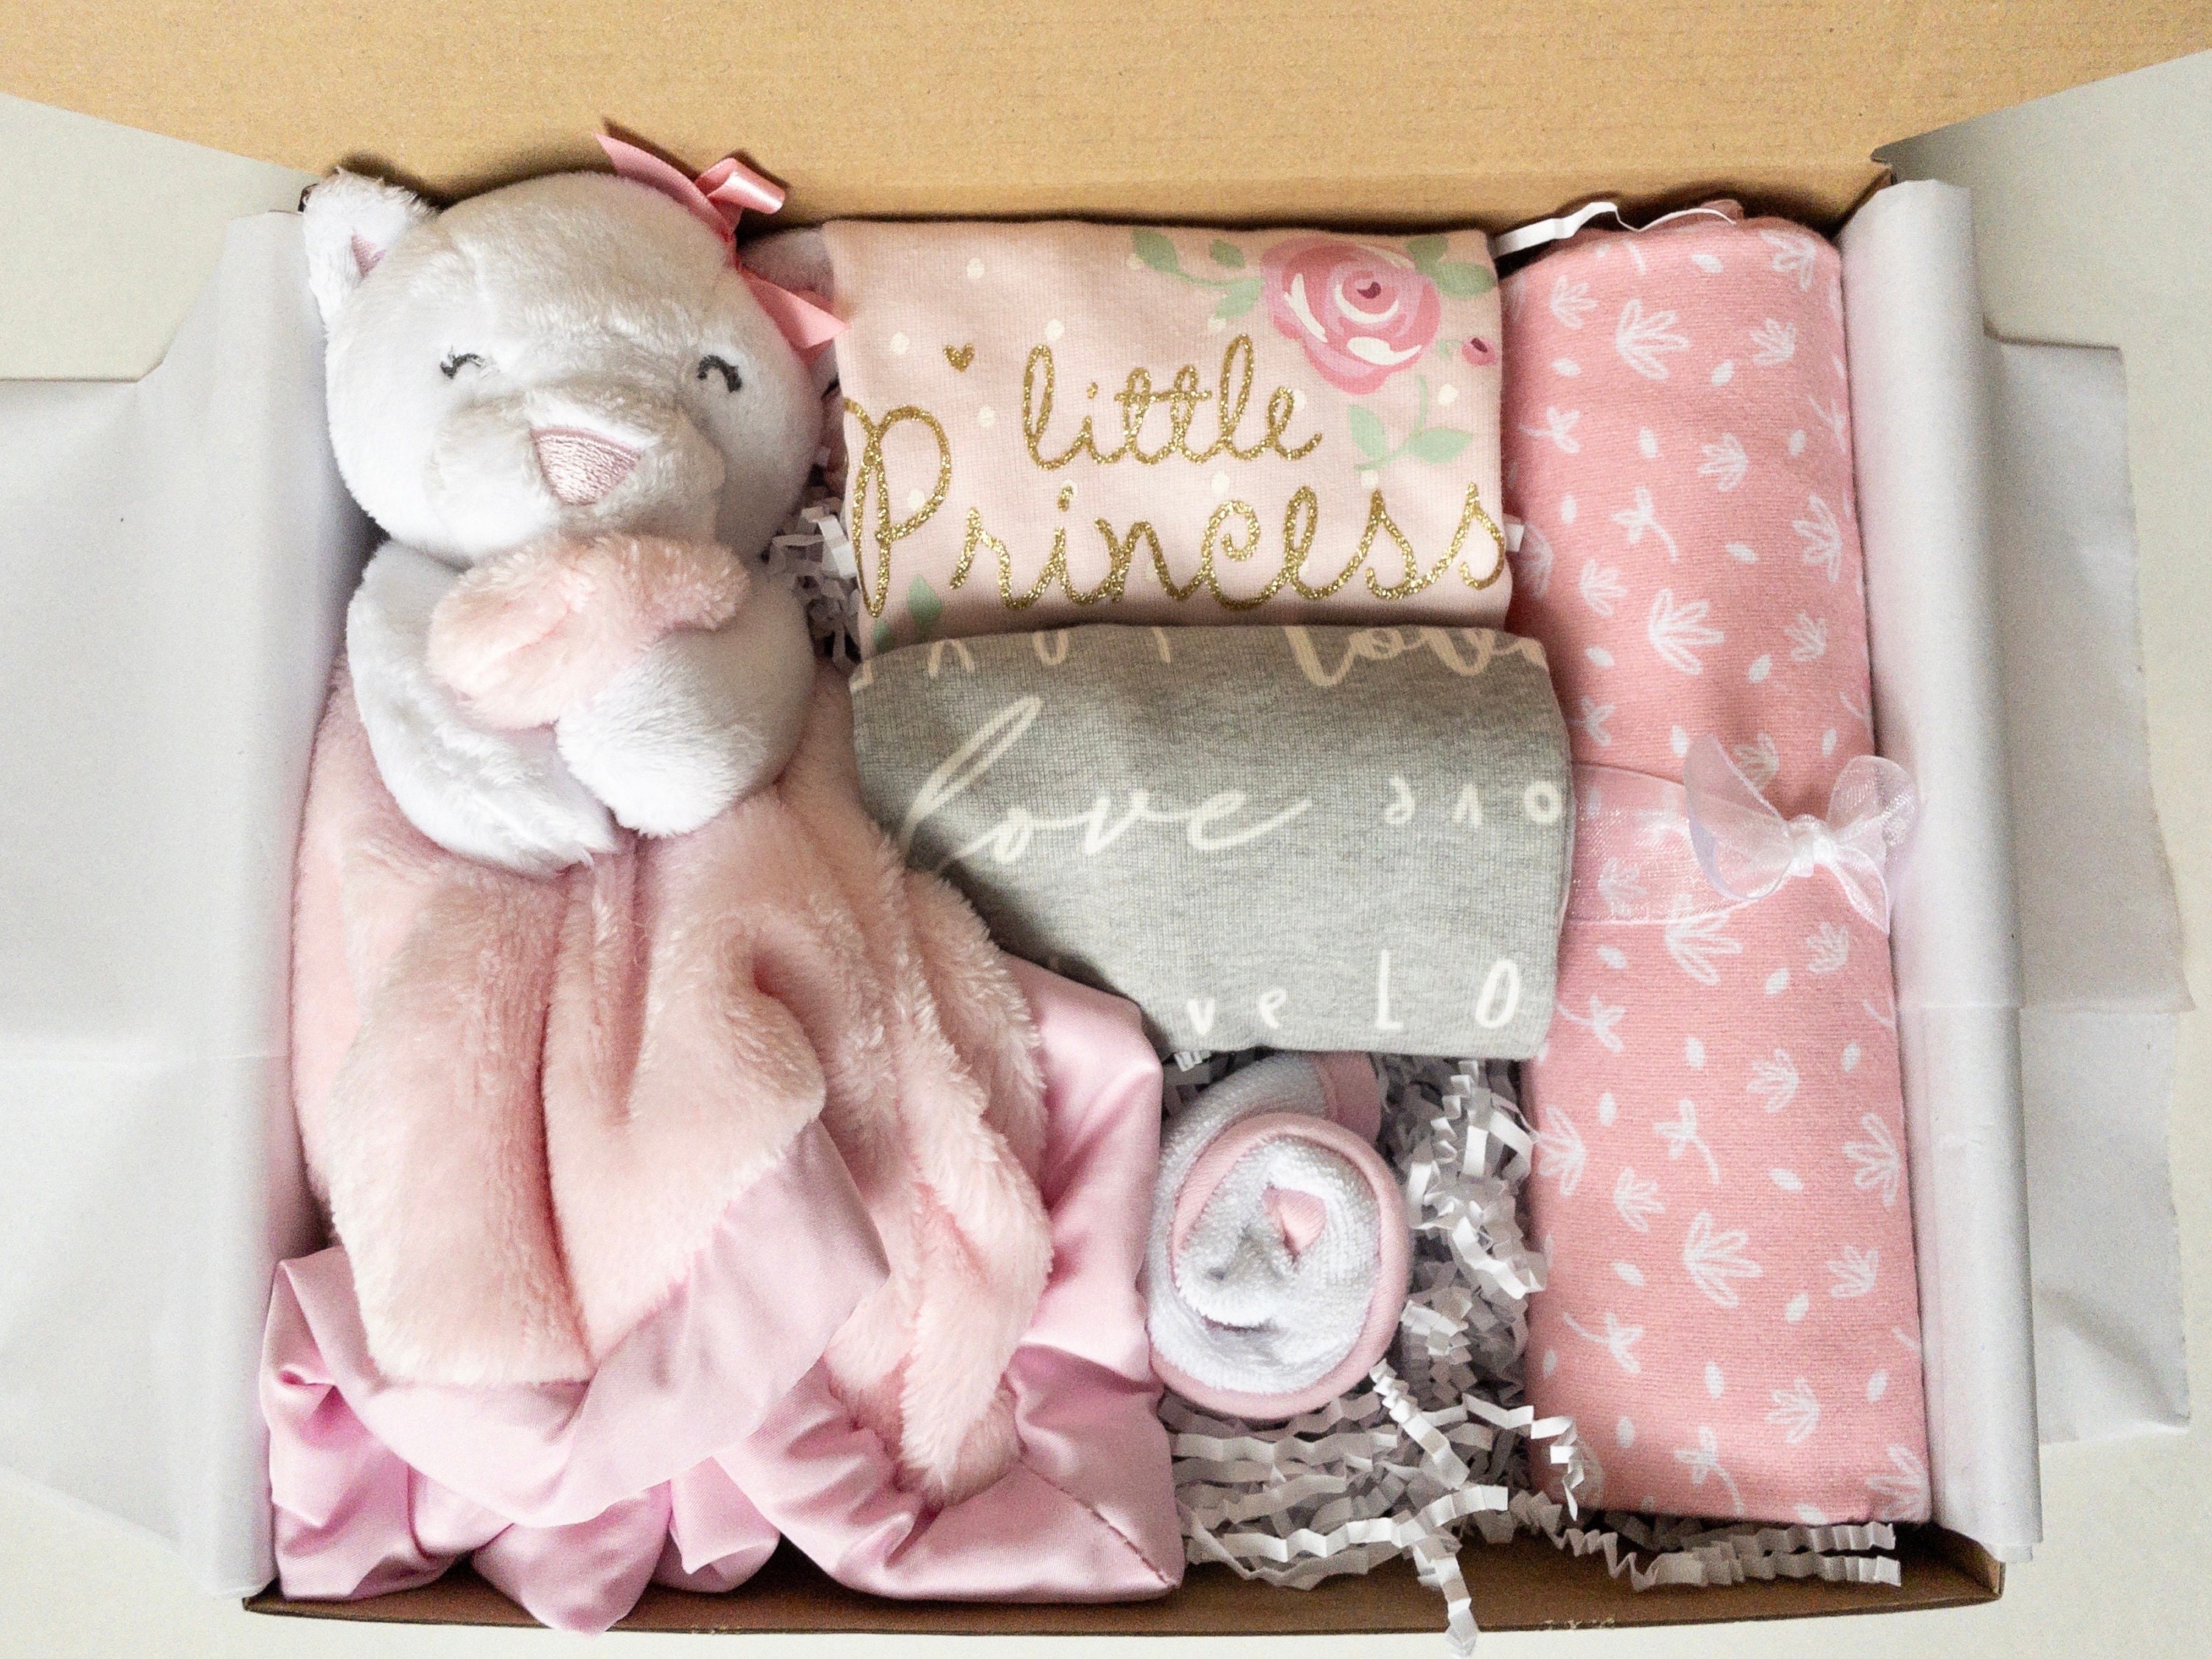 Baby Gift Box, Baby Gift Set, Baby Shower Gift, Gift for Babies. New Baby  Gift, Unisex Gift, Swaddle, Bodysuits, Burp Cloth, Teether, Toy 